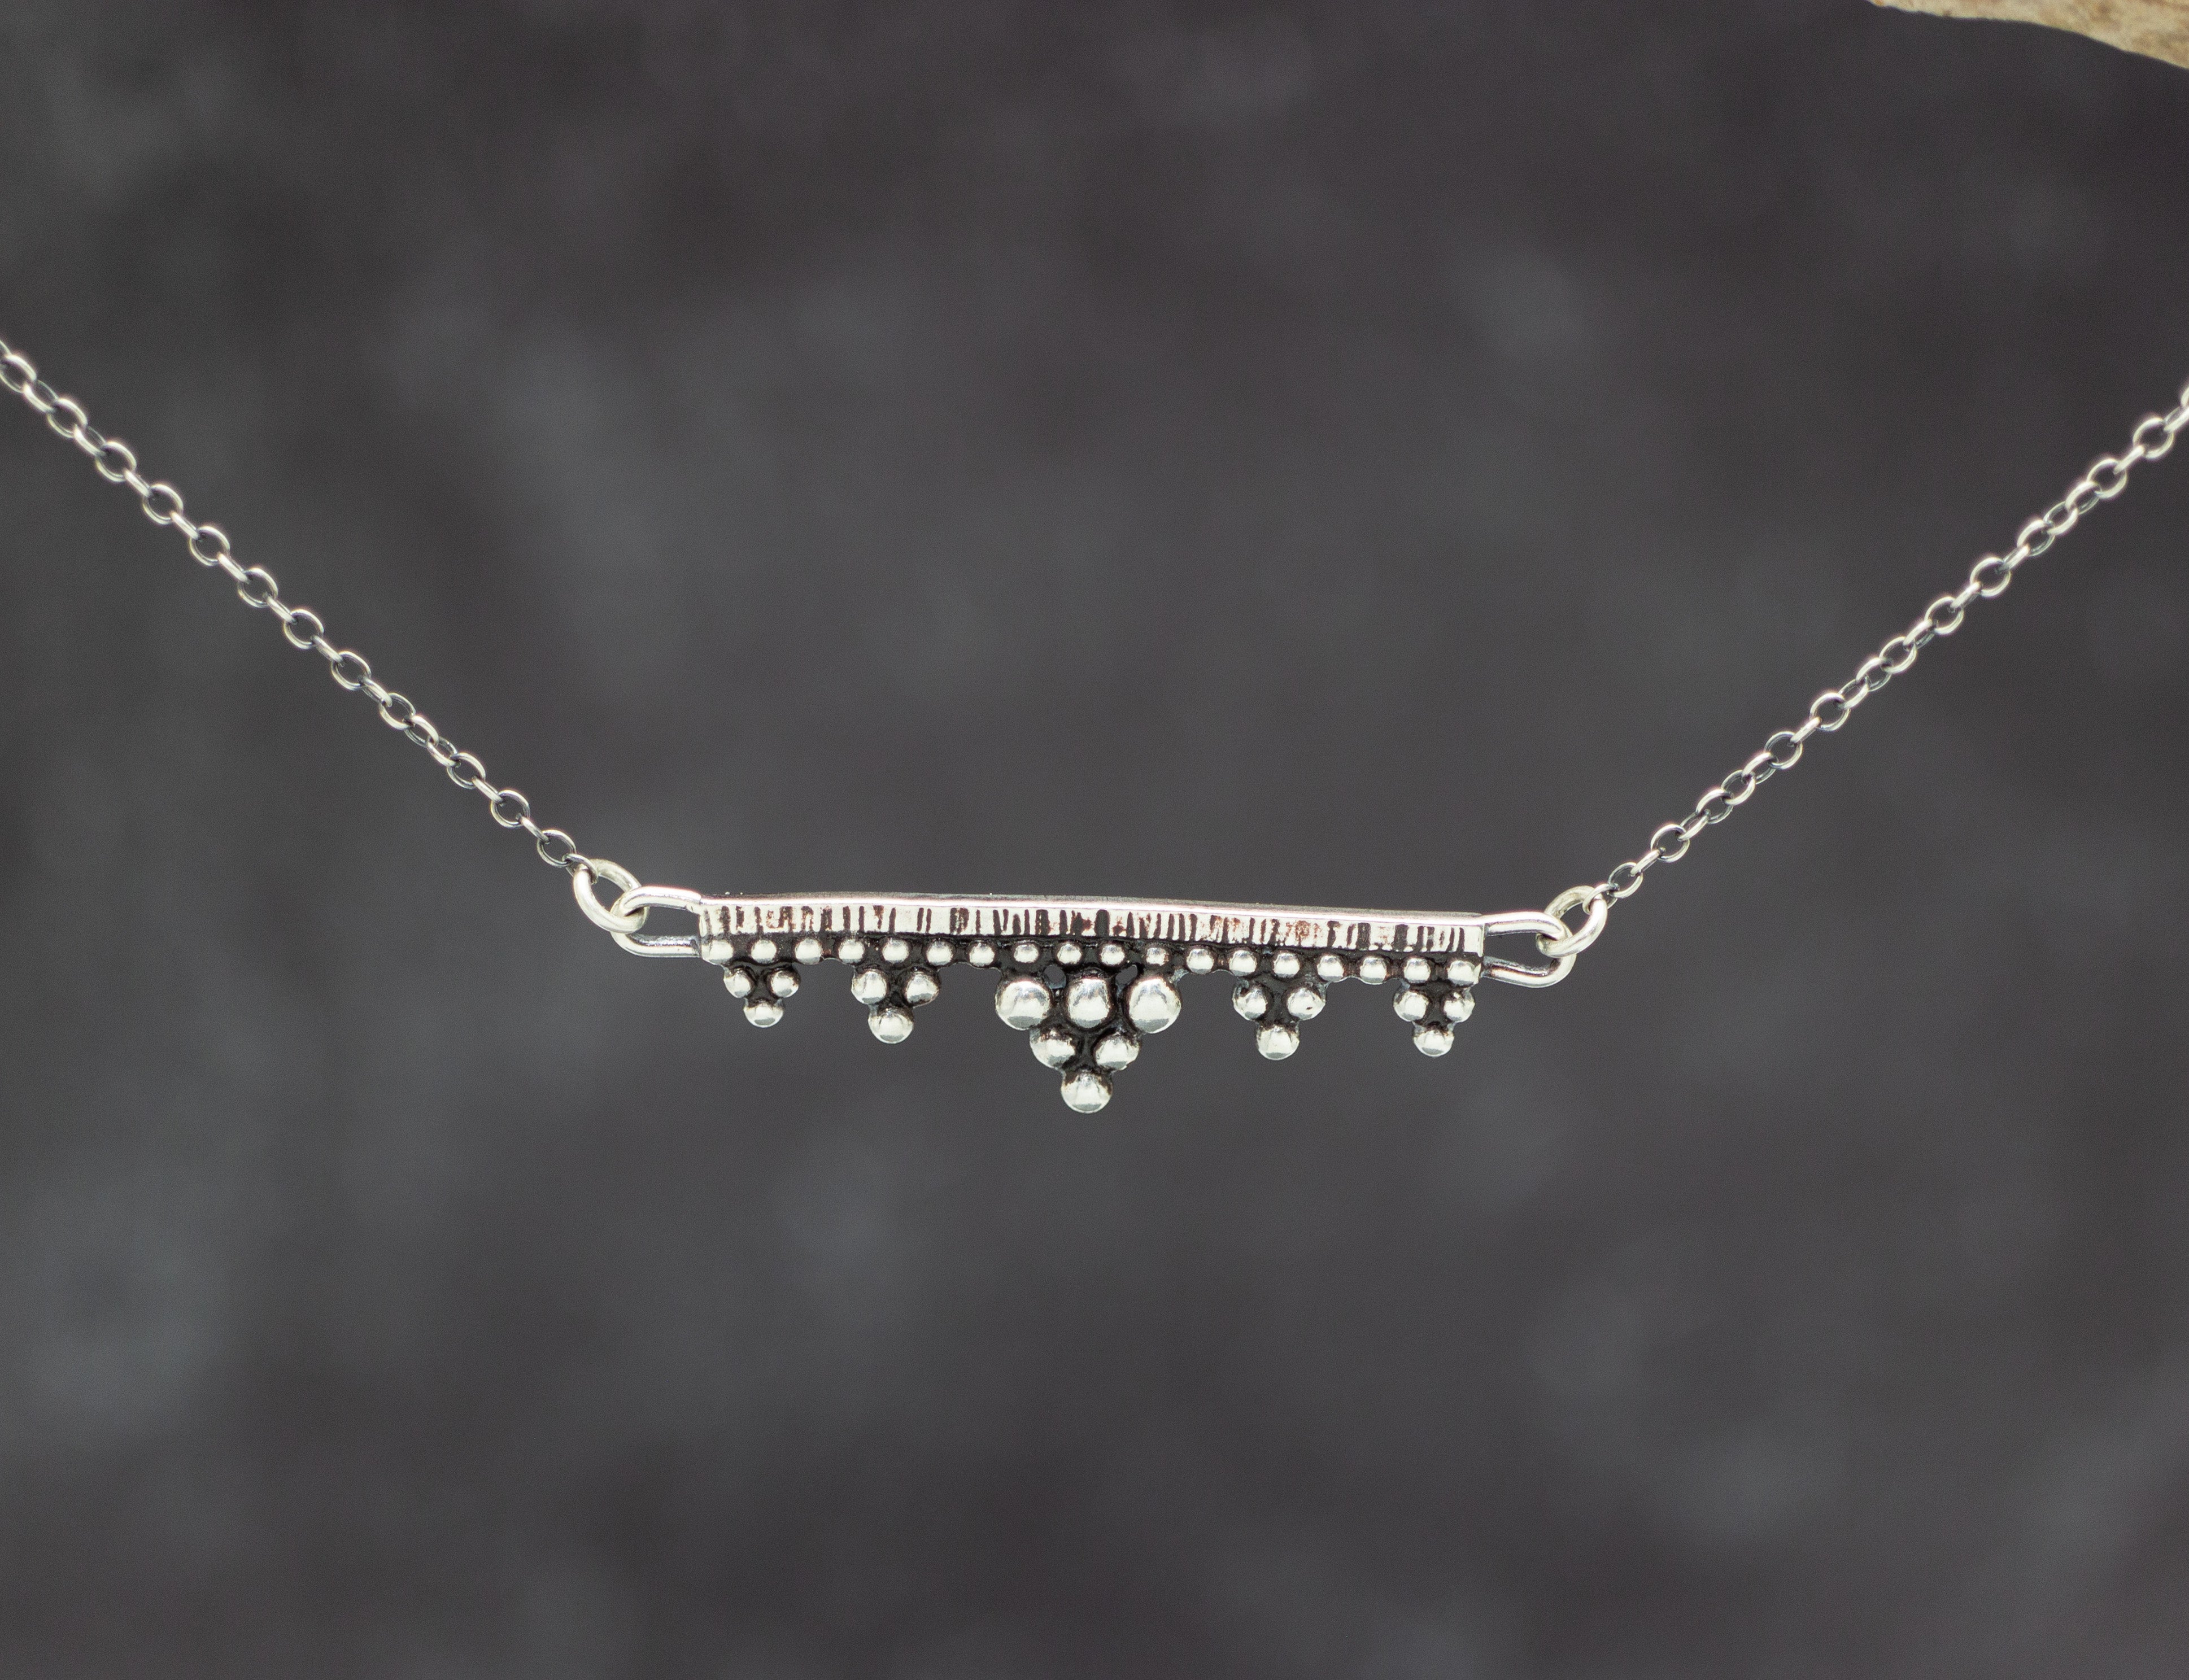 Straight Bar Granulation Necklace Sterling Silver and Fine Silver Made to Order